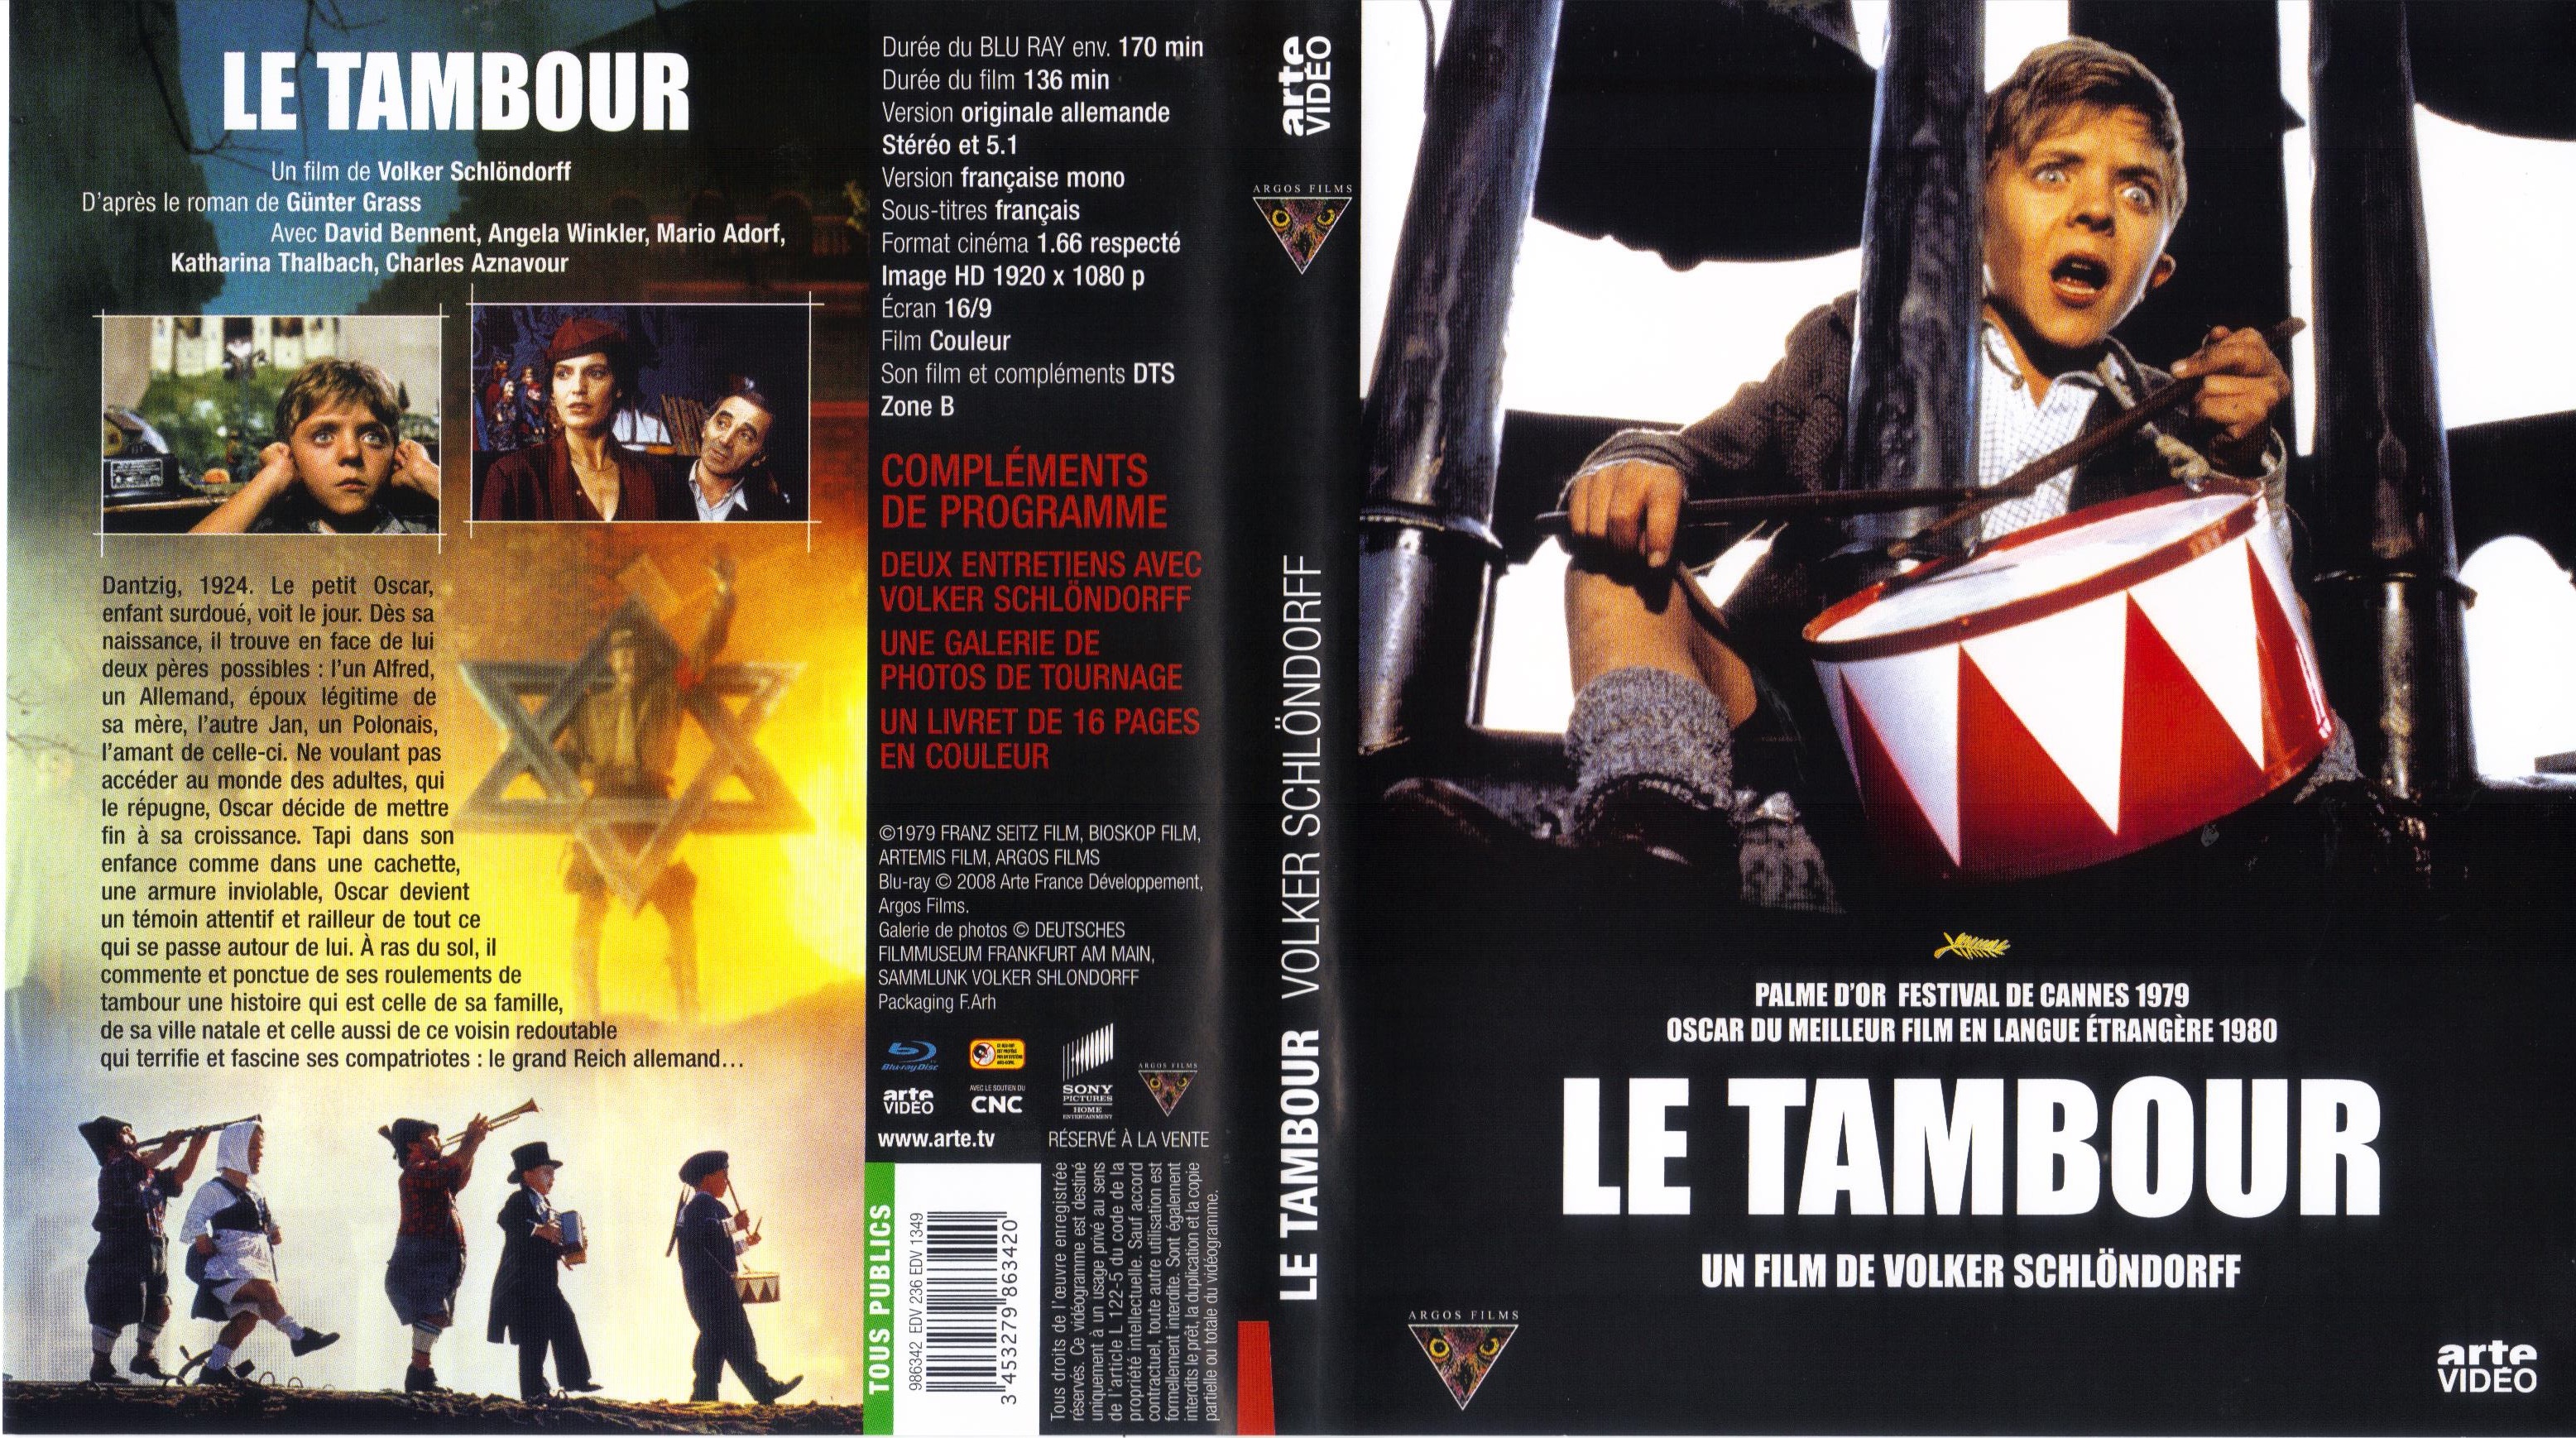 Jaquette DVD Le tambour (BLU-RAY)